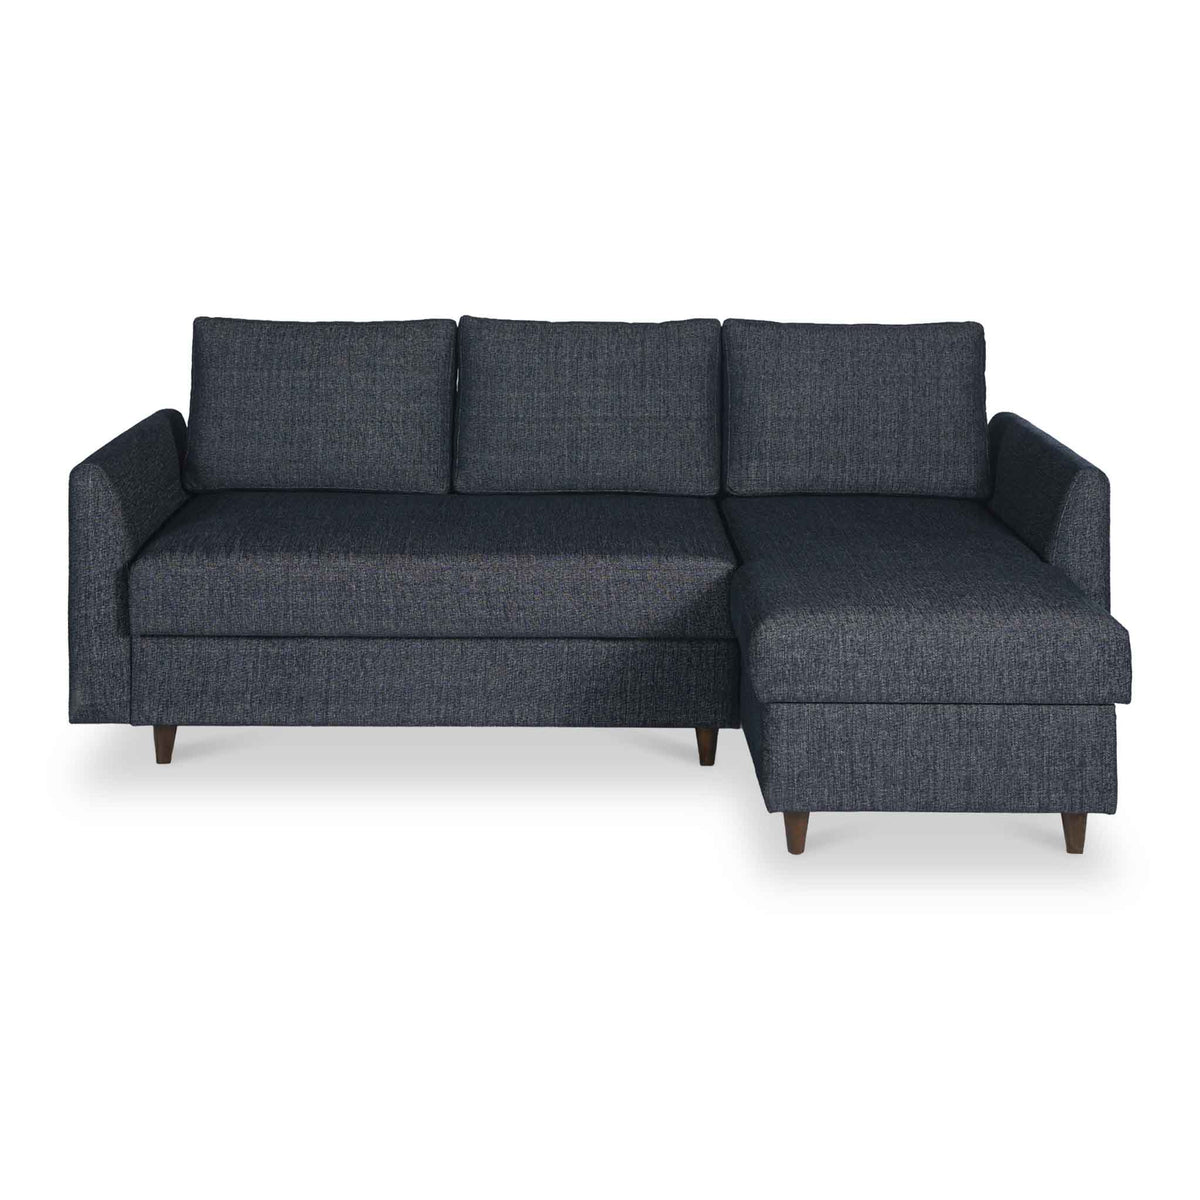 Millen Navy Blue 3 Seater Chaise Sofa Bed